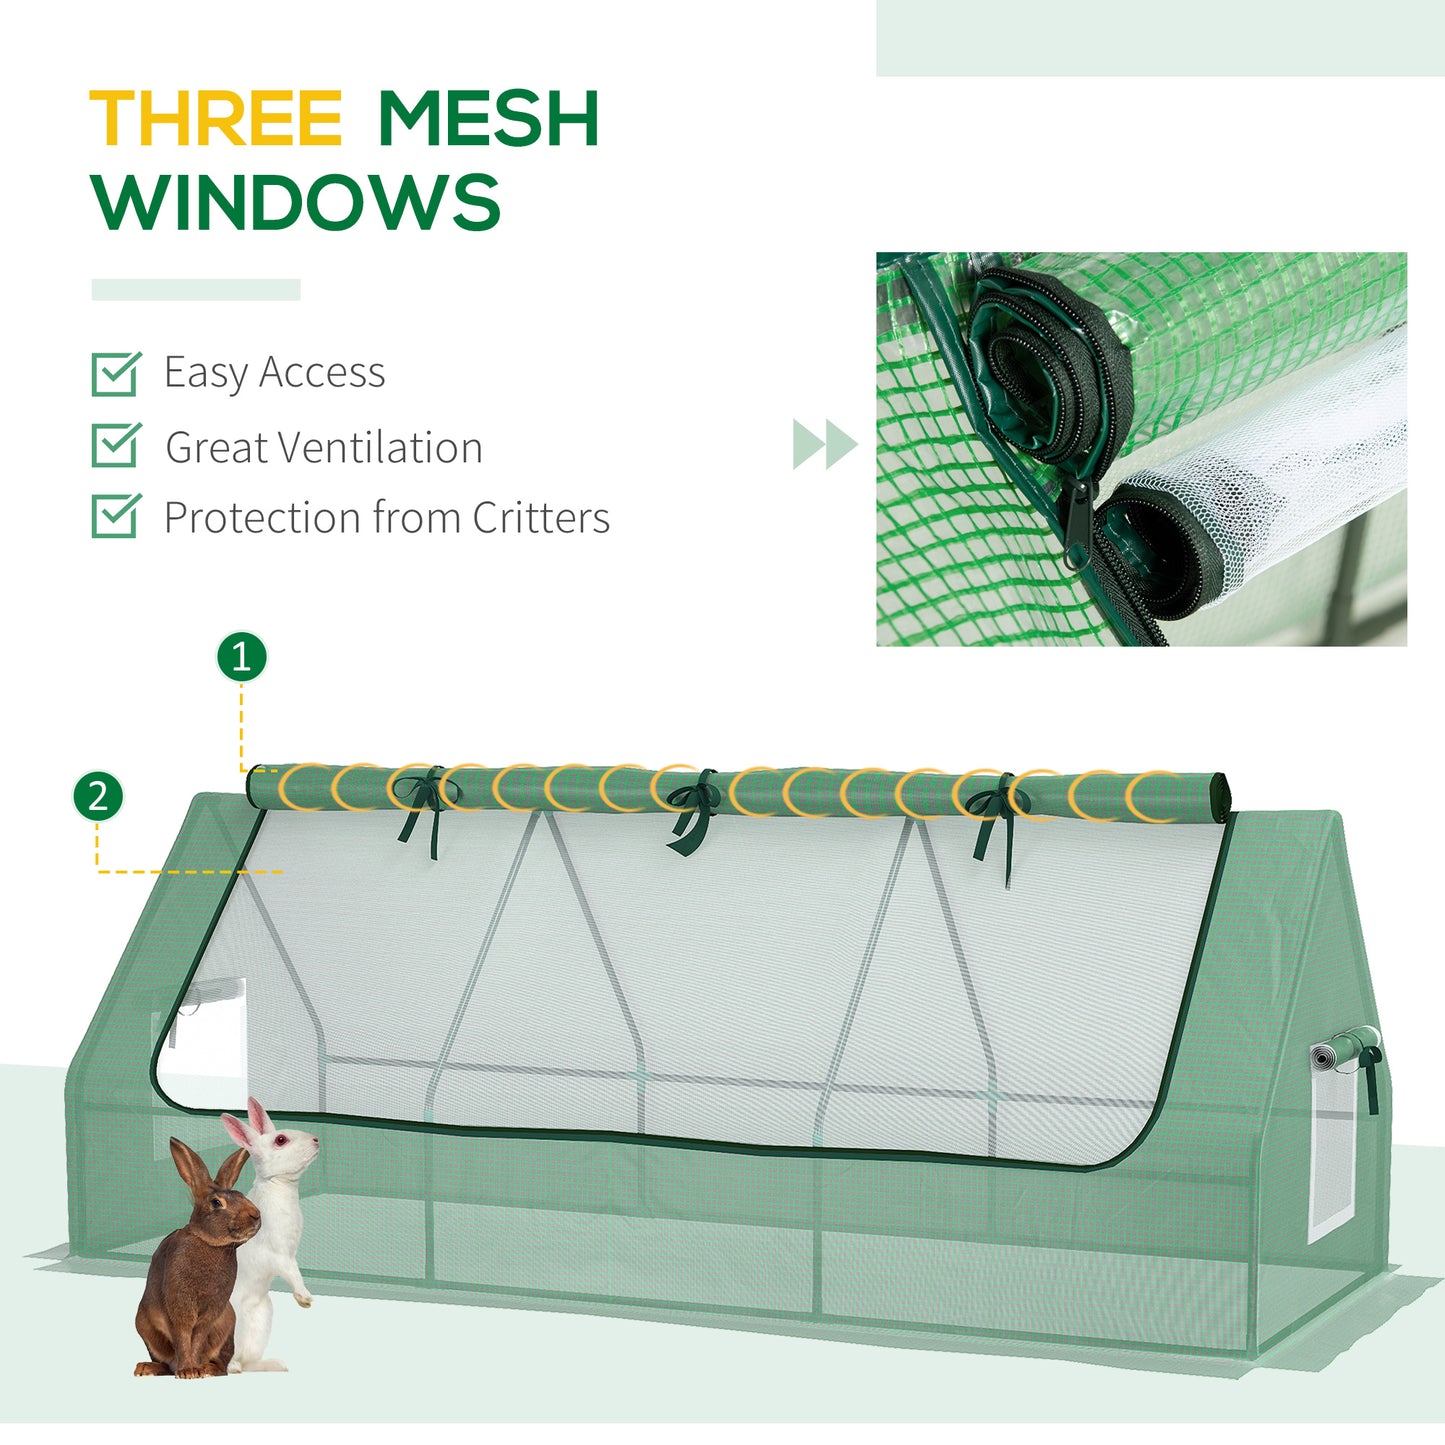 Outsunny Compact Polytunnel: Walk-In Greenhouse with Roll-Up Door & Vents, 240x90x90cm, Green